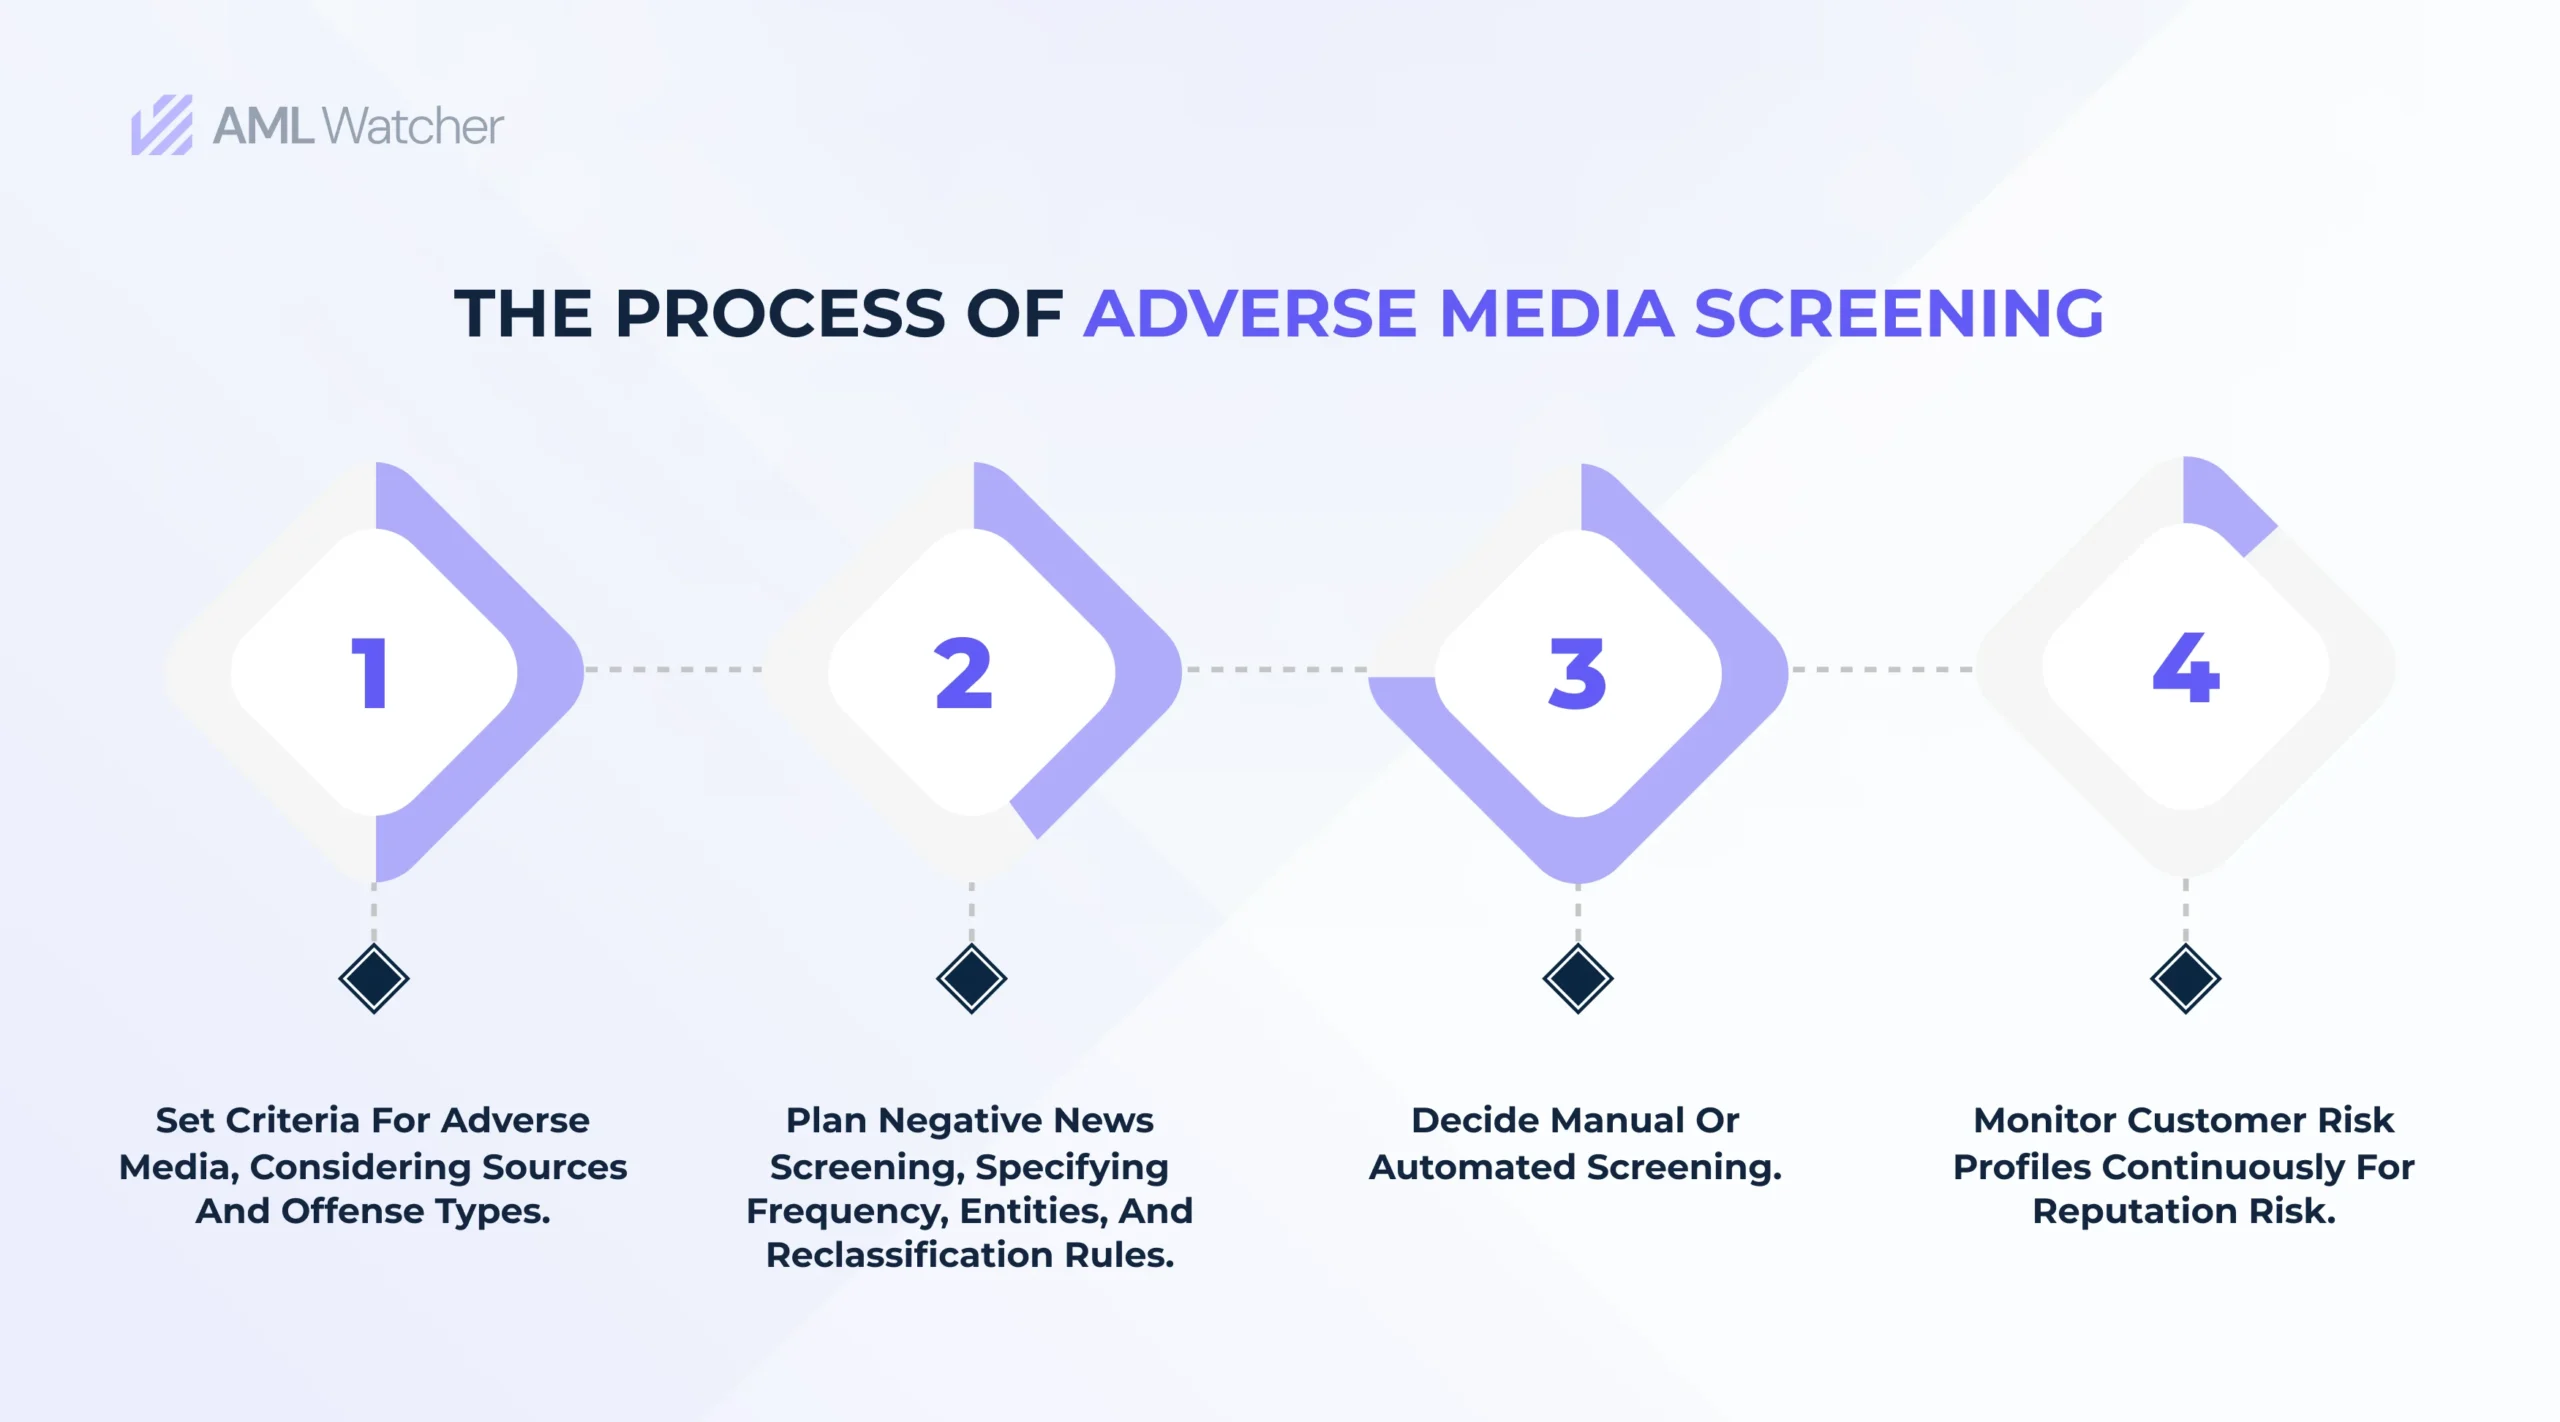  Steps for Effective Adverse Media Screening: Criteria, Planning, Automation, & Continuous Customer Risk Monitoring 